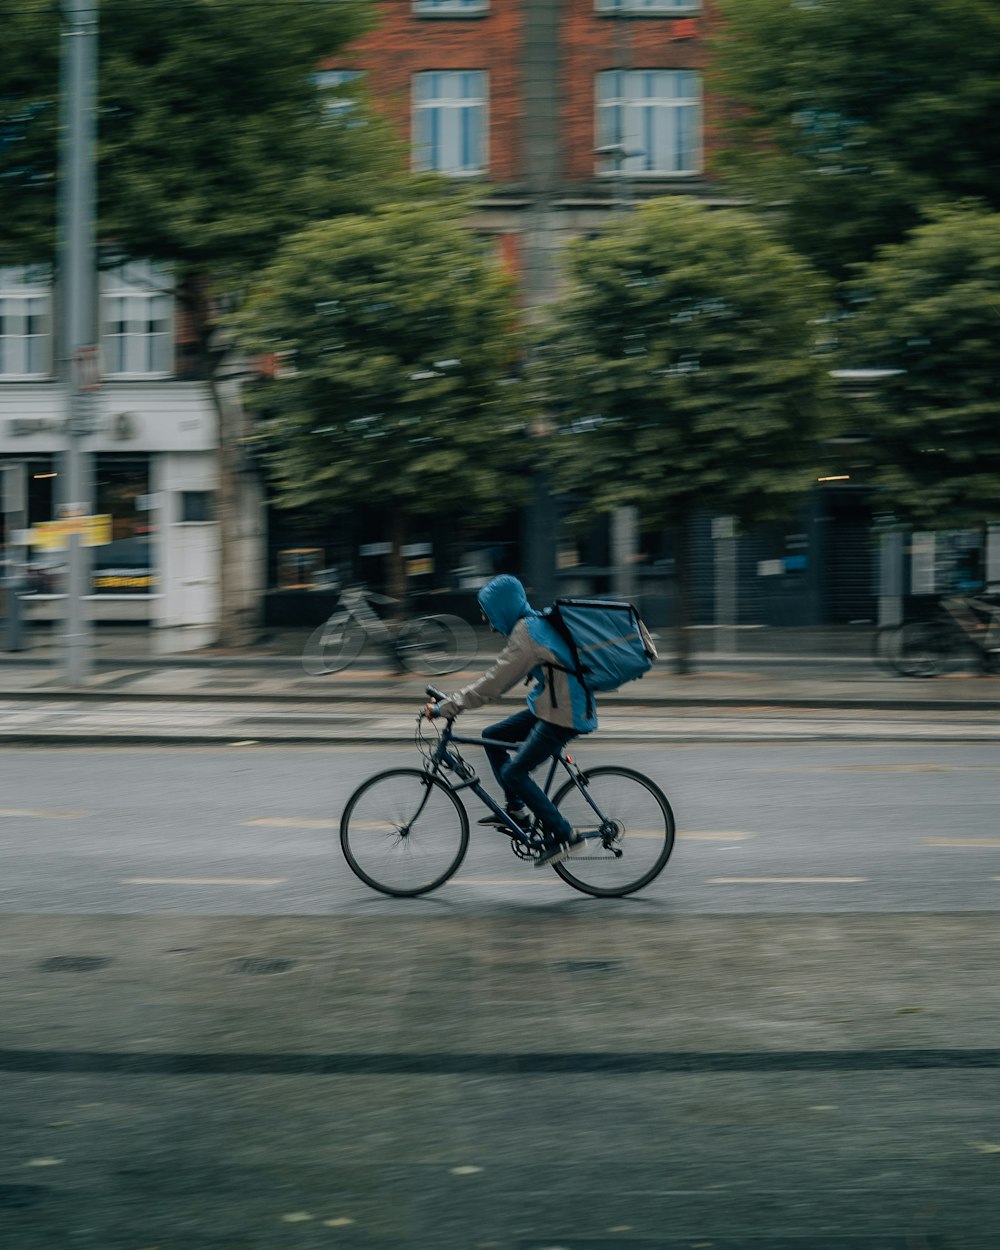 man in blue shirt riding bicycle on road during daytime